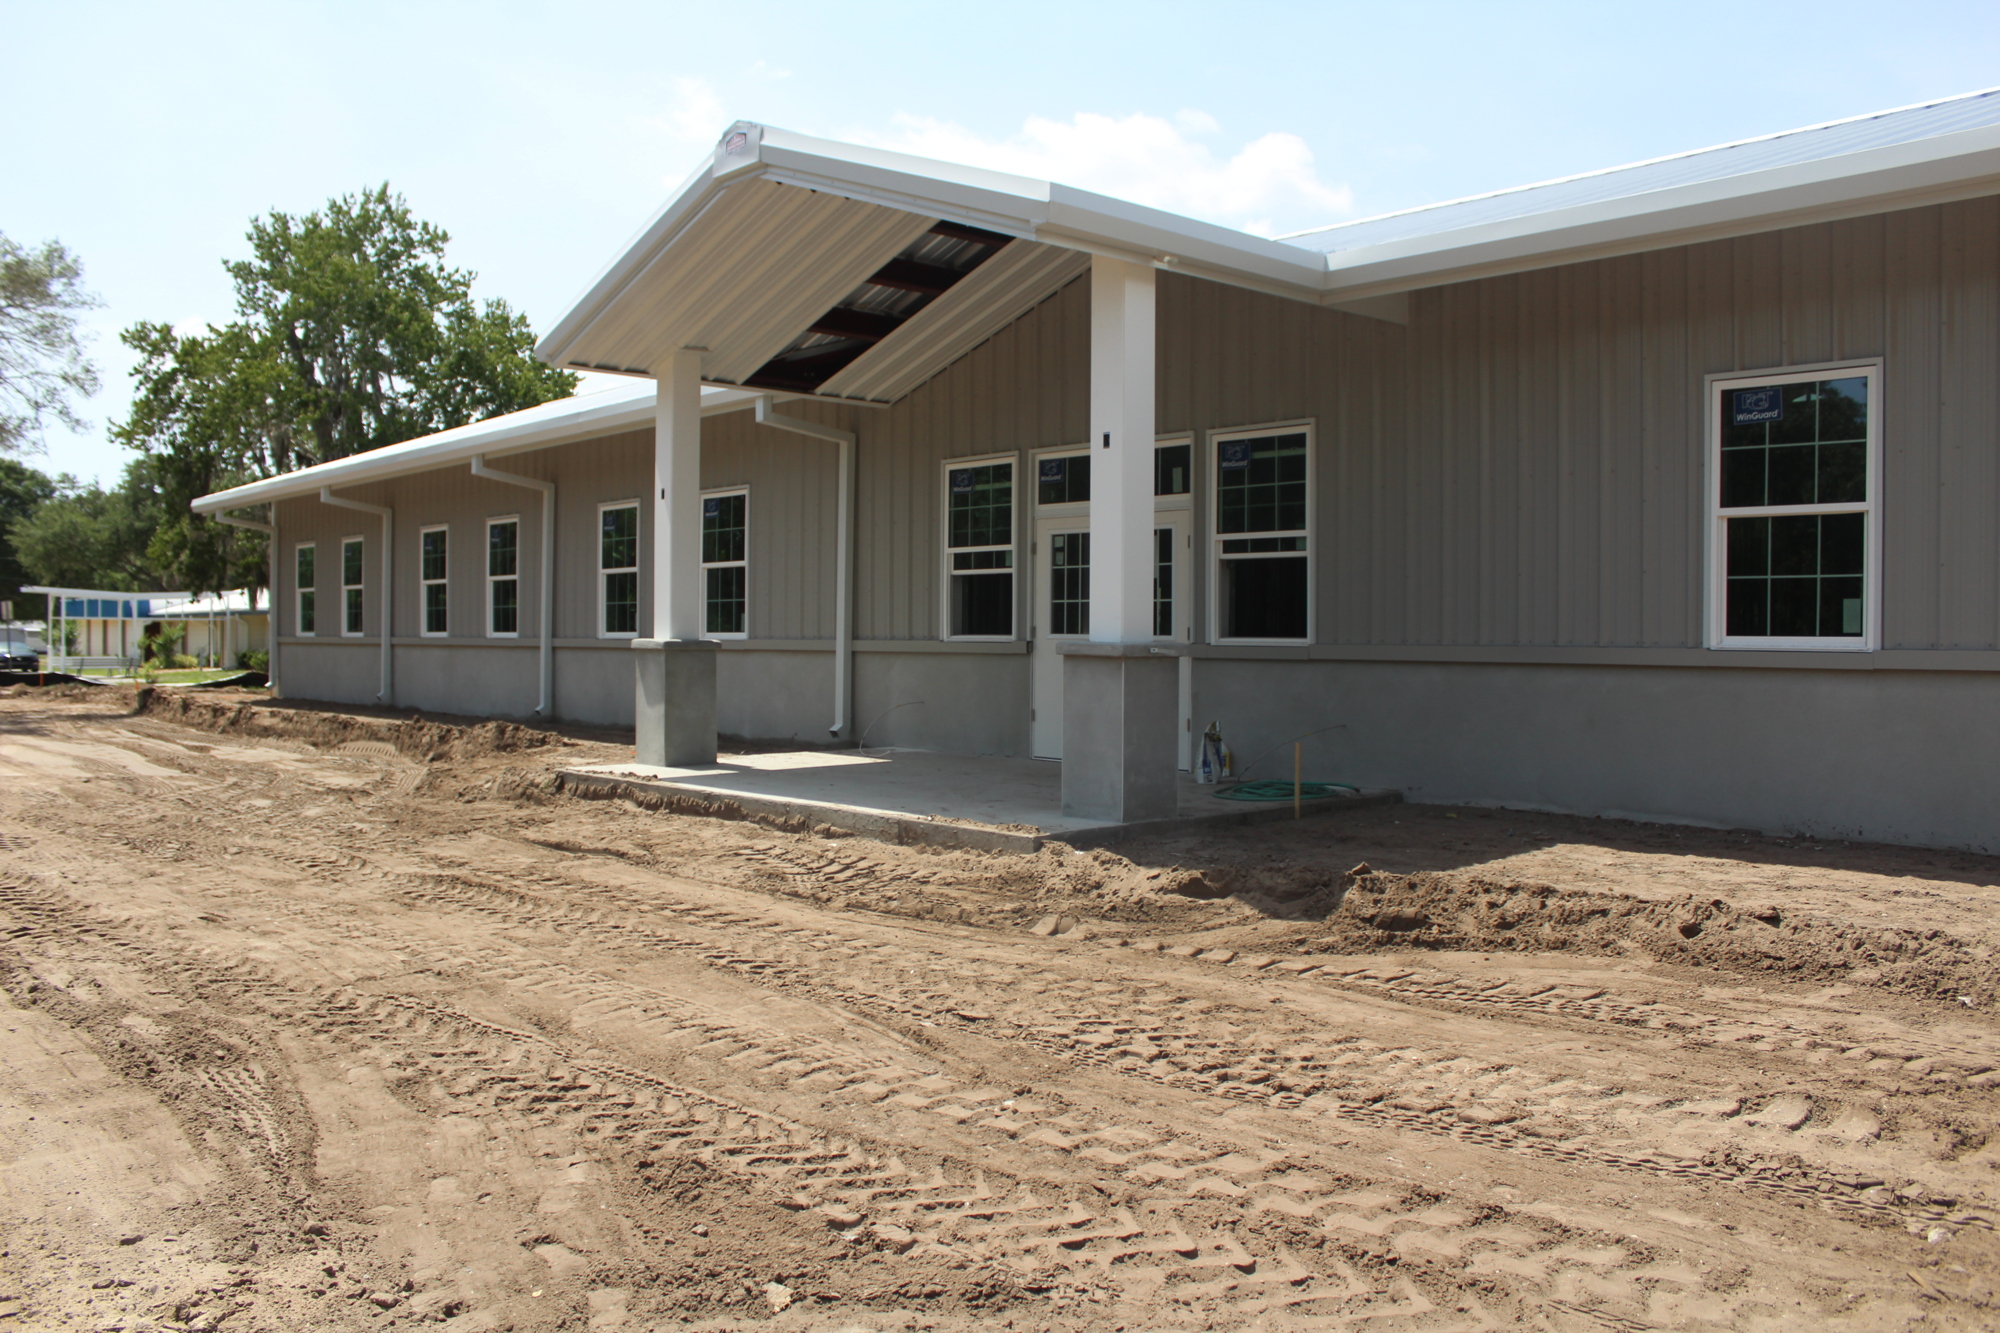 The Haven's newest addition, the Frank Stern Employment Center that is scheduled for completion this August.